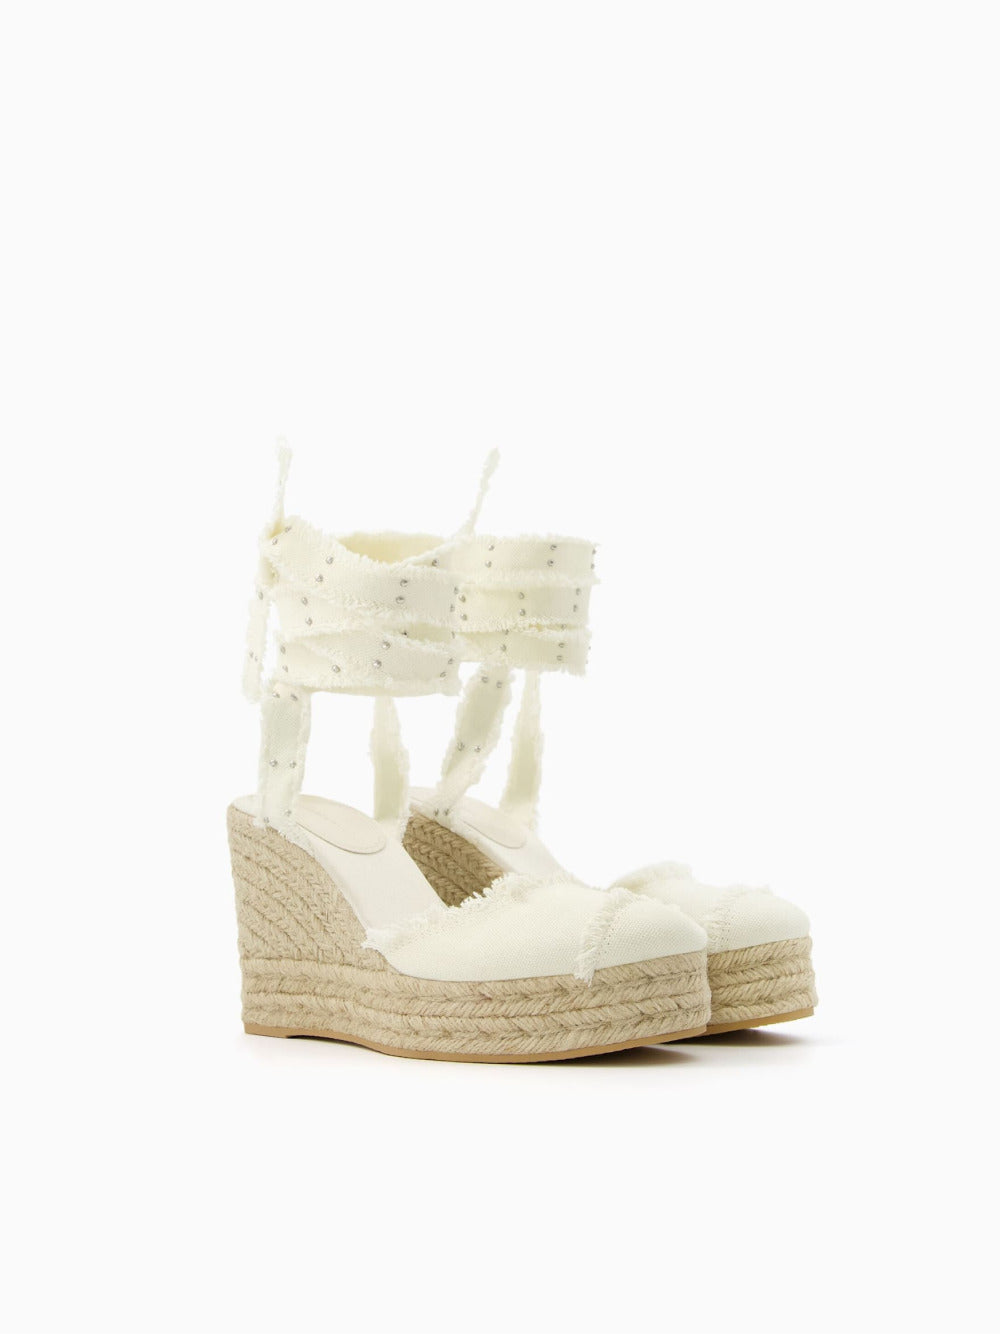 Lace-up jute wedges with studs